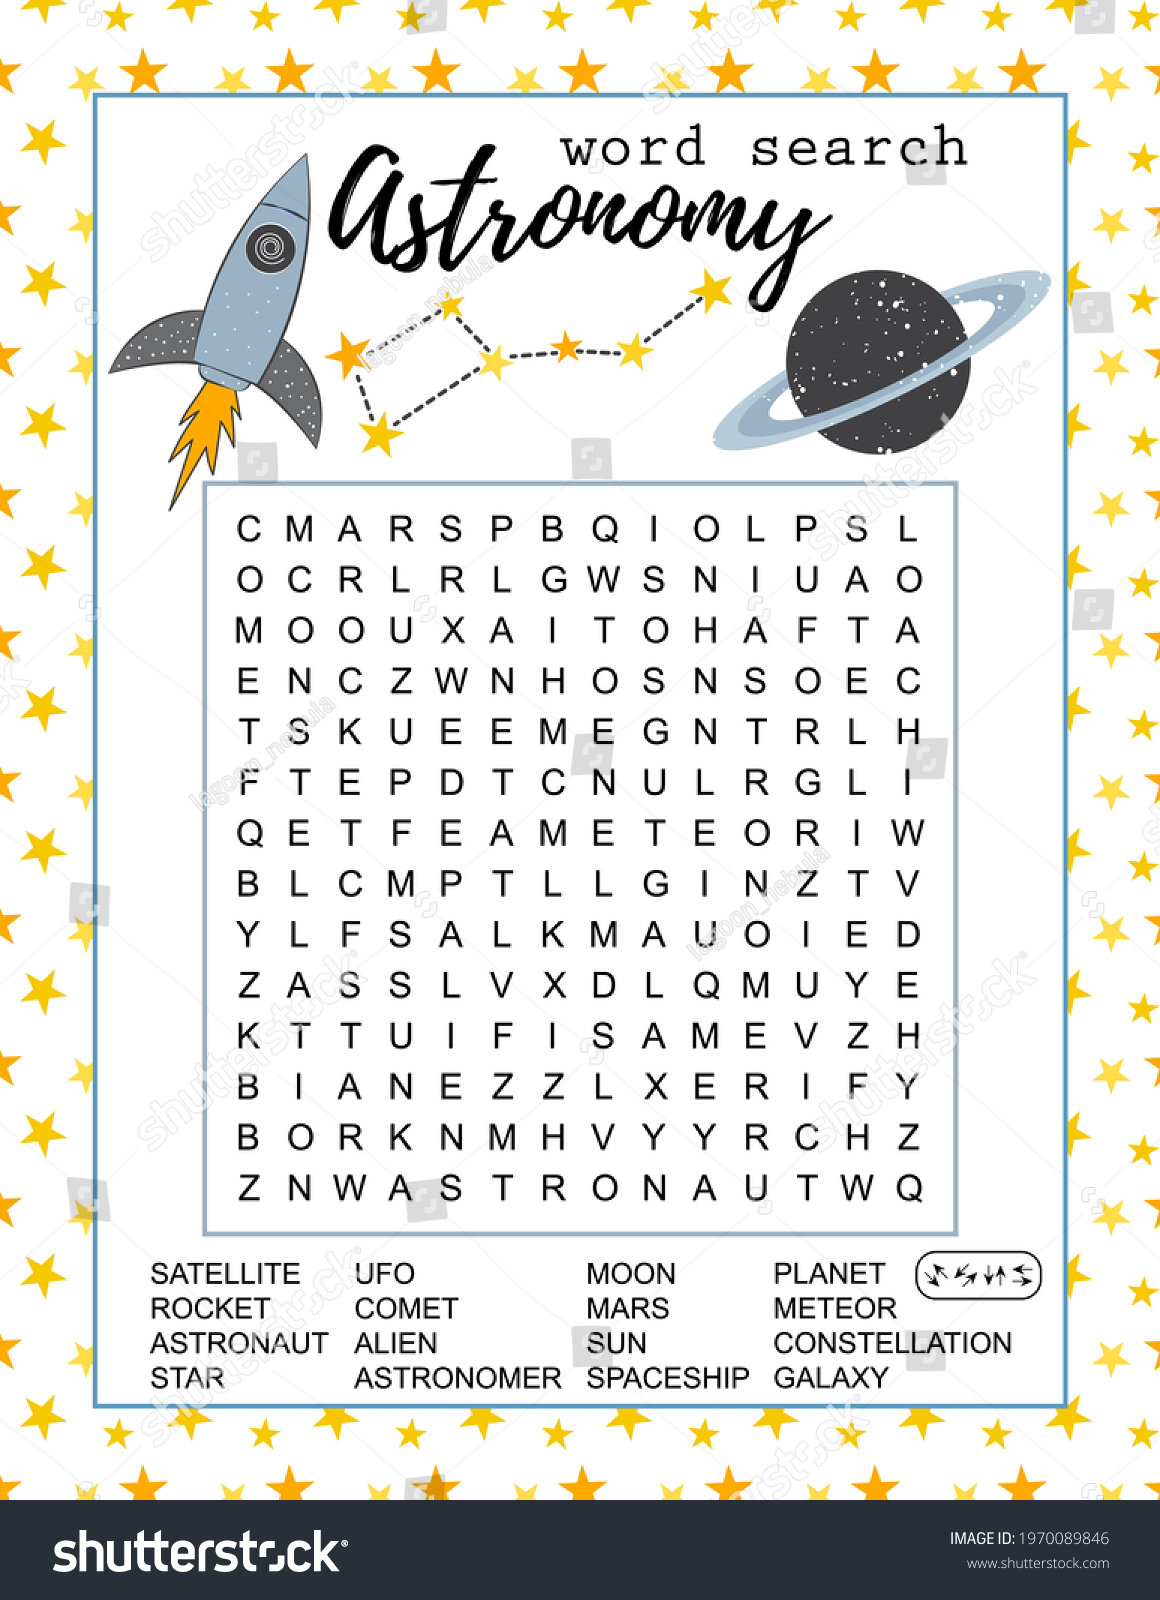 astronomy word search puzzle educational game stock vector royalty free 1970089846 shutterstock